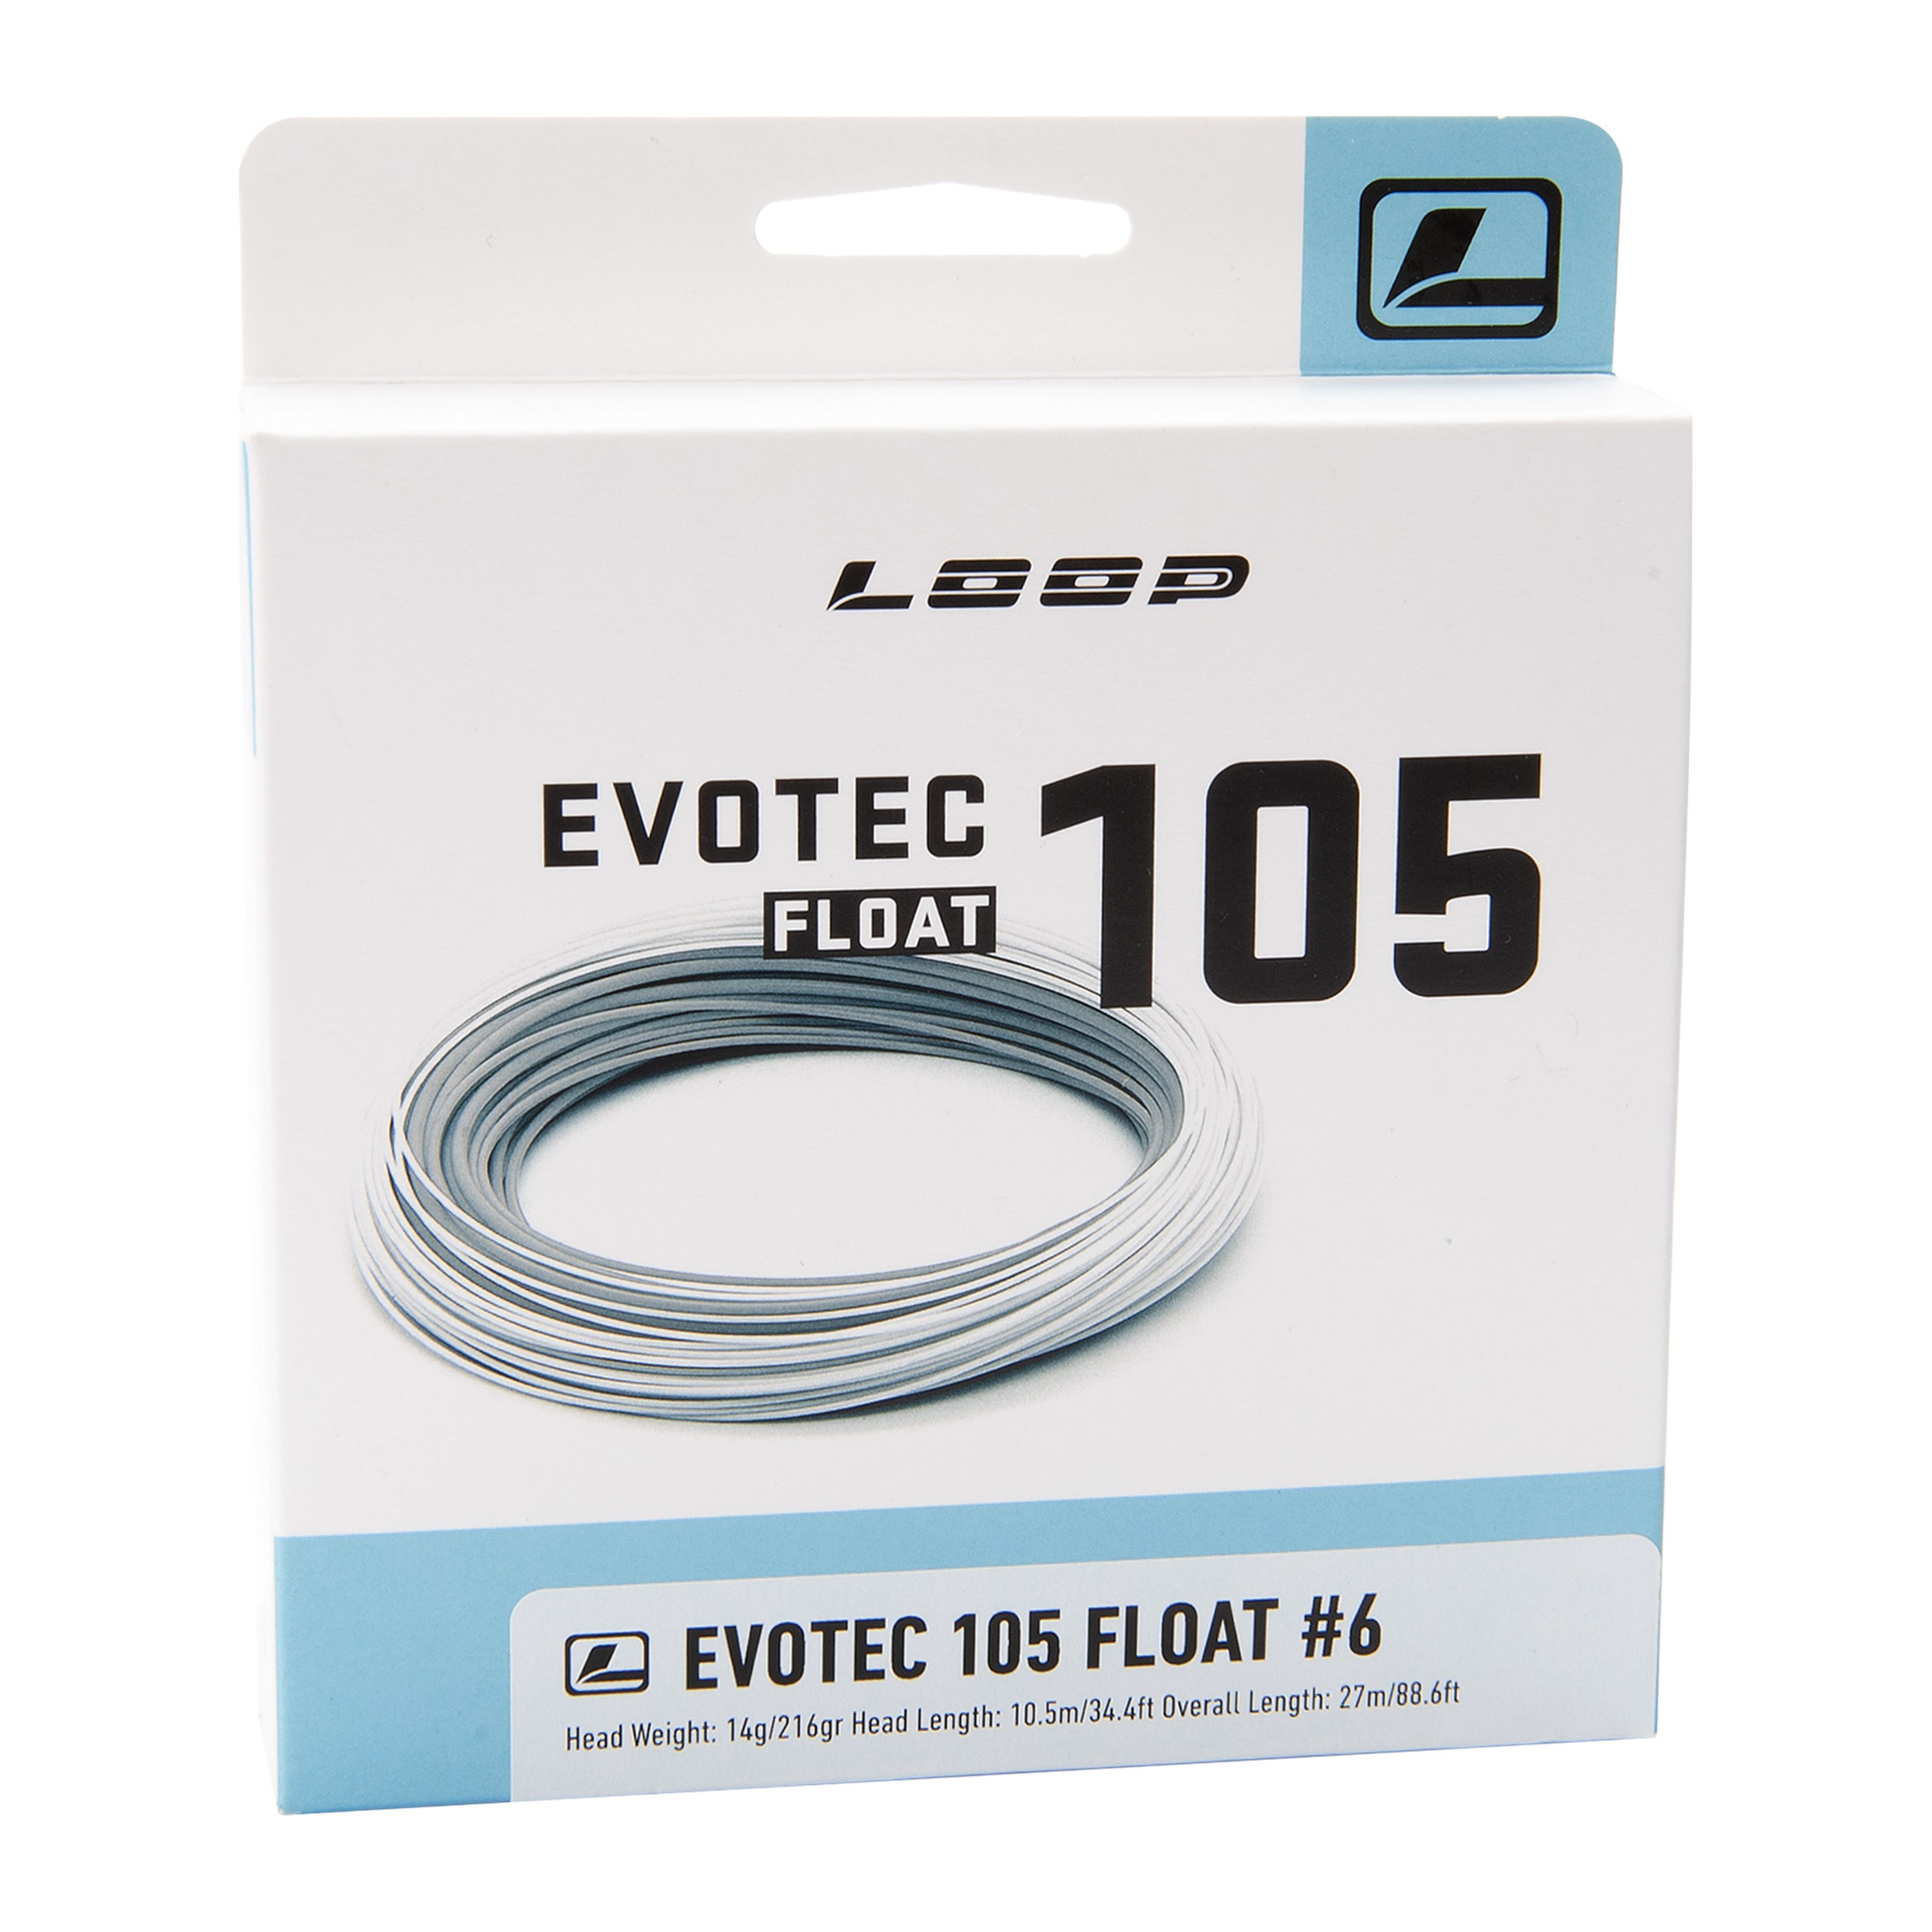 LOOP Evotec 105 Floating - Atlantic Rivers Outfitting Company